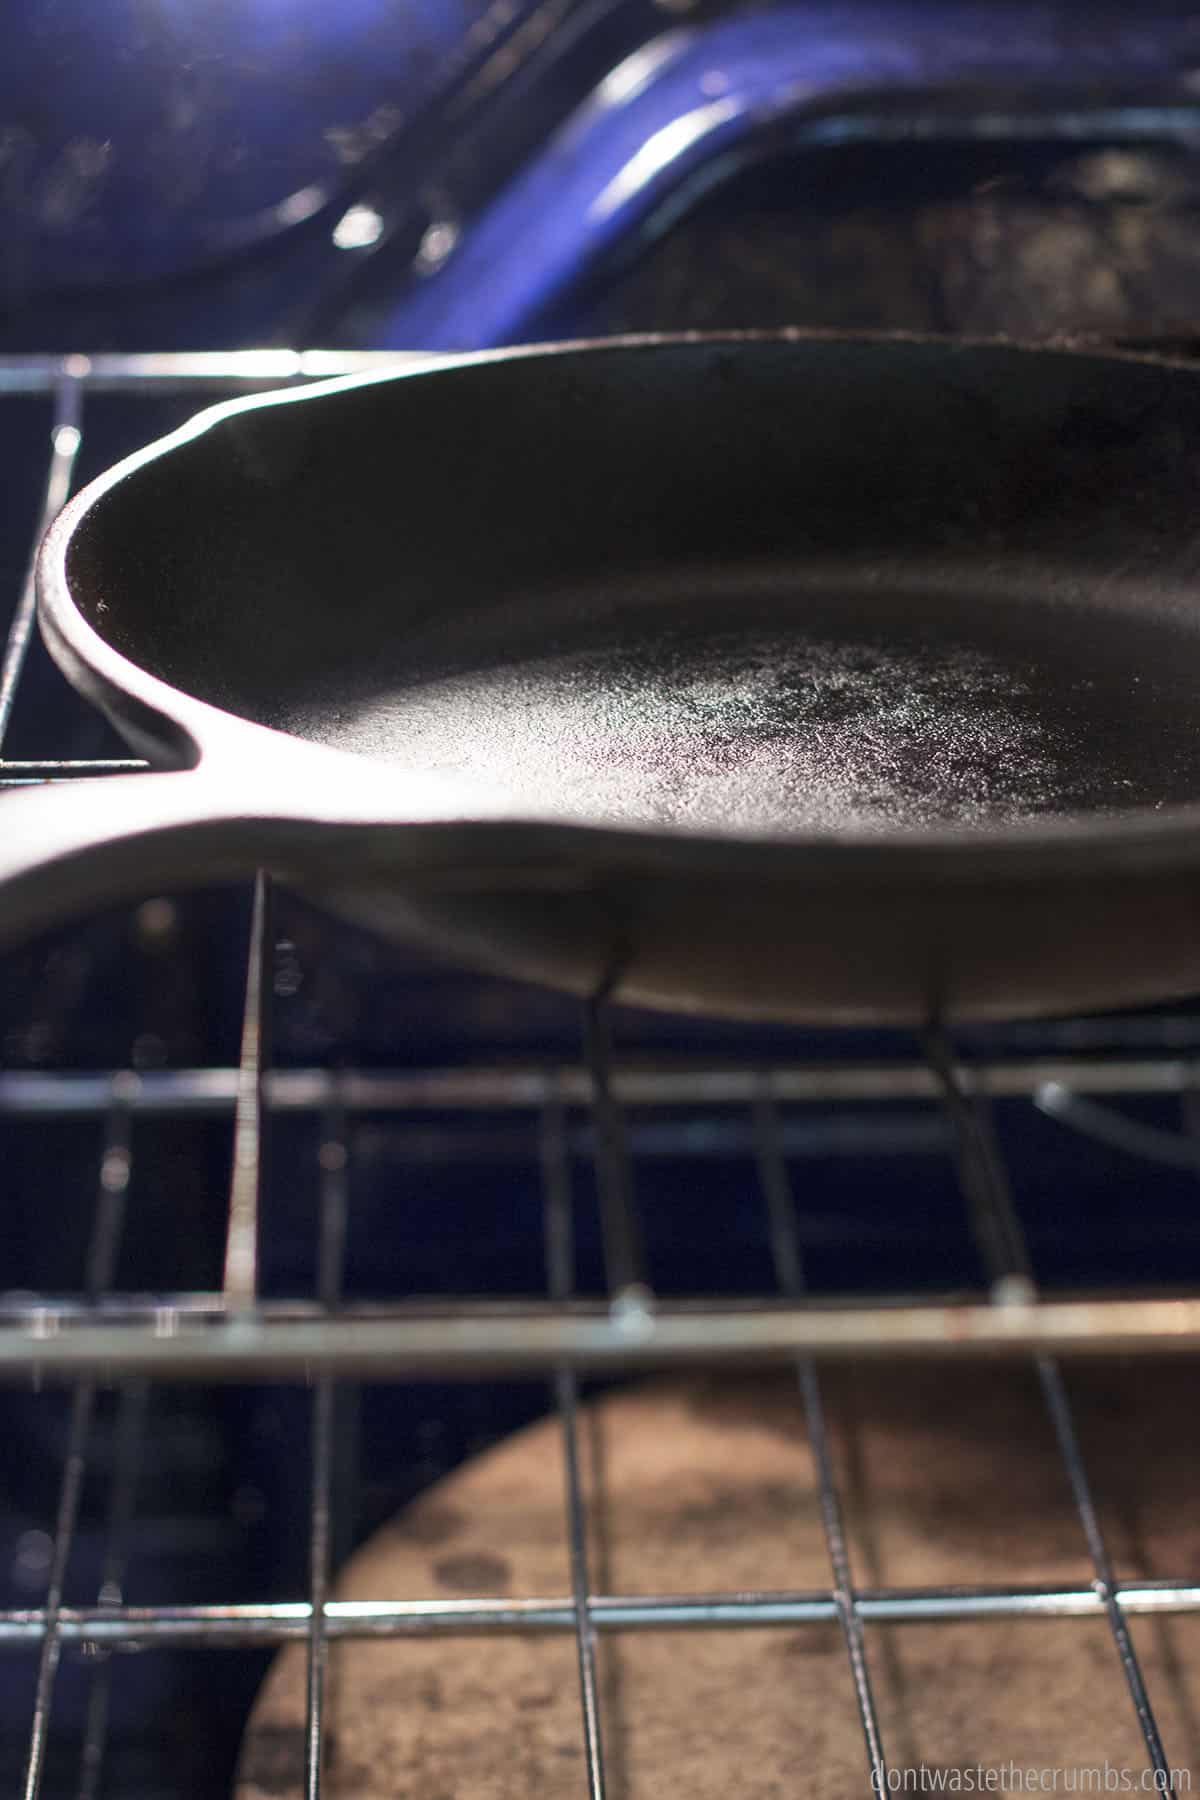 The baking step of seasoning cast iron: An oiled cast iron being baked in the oven so that the oil deeply penetrates the cast iron, creating a natural non-stick surface.